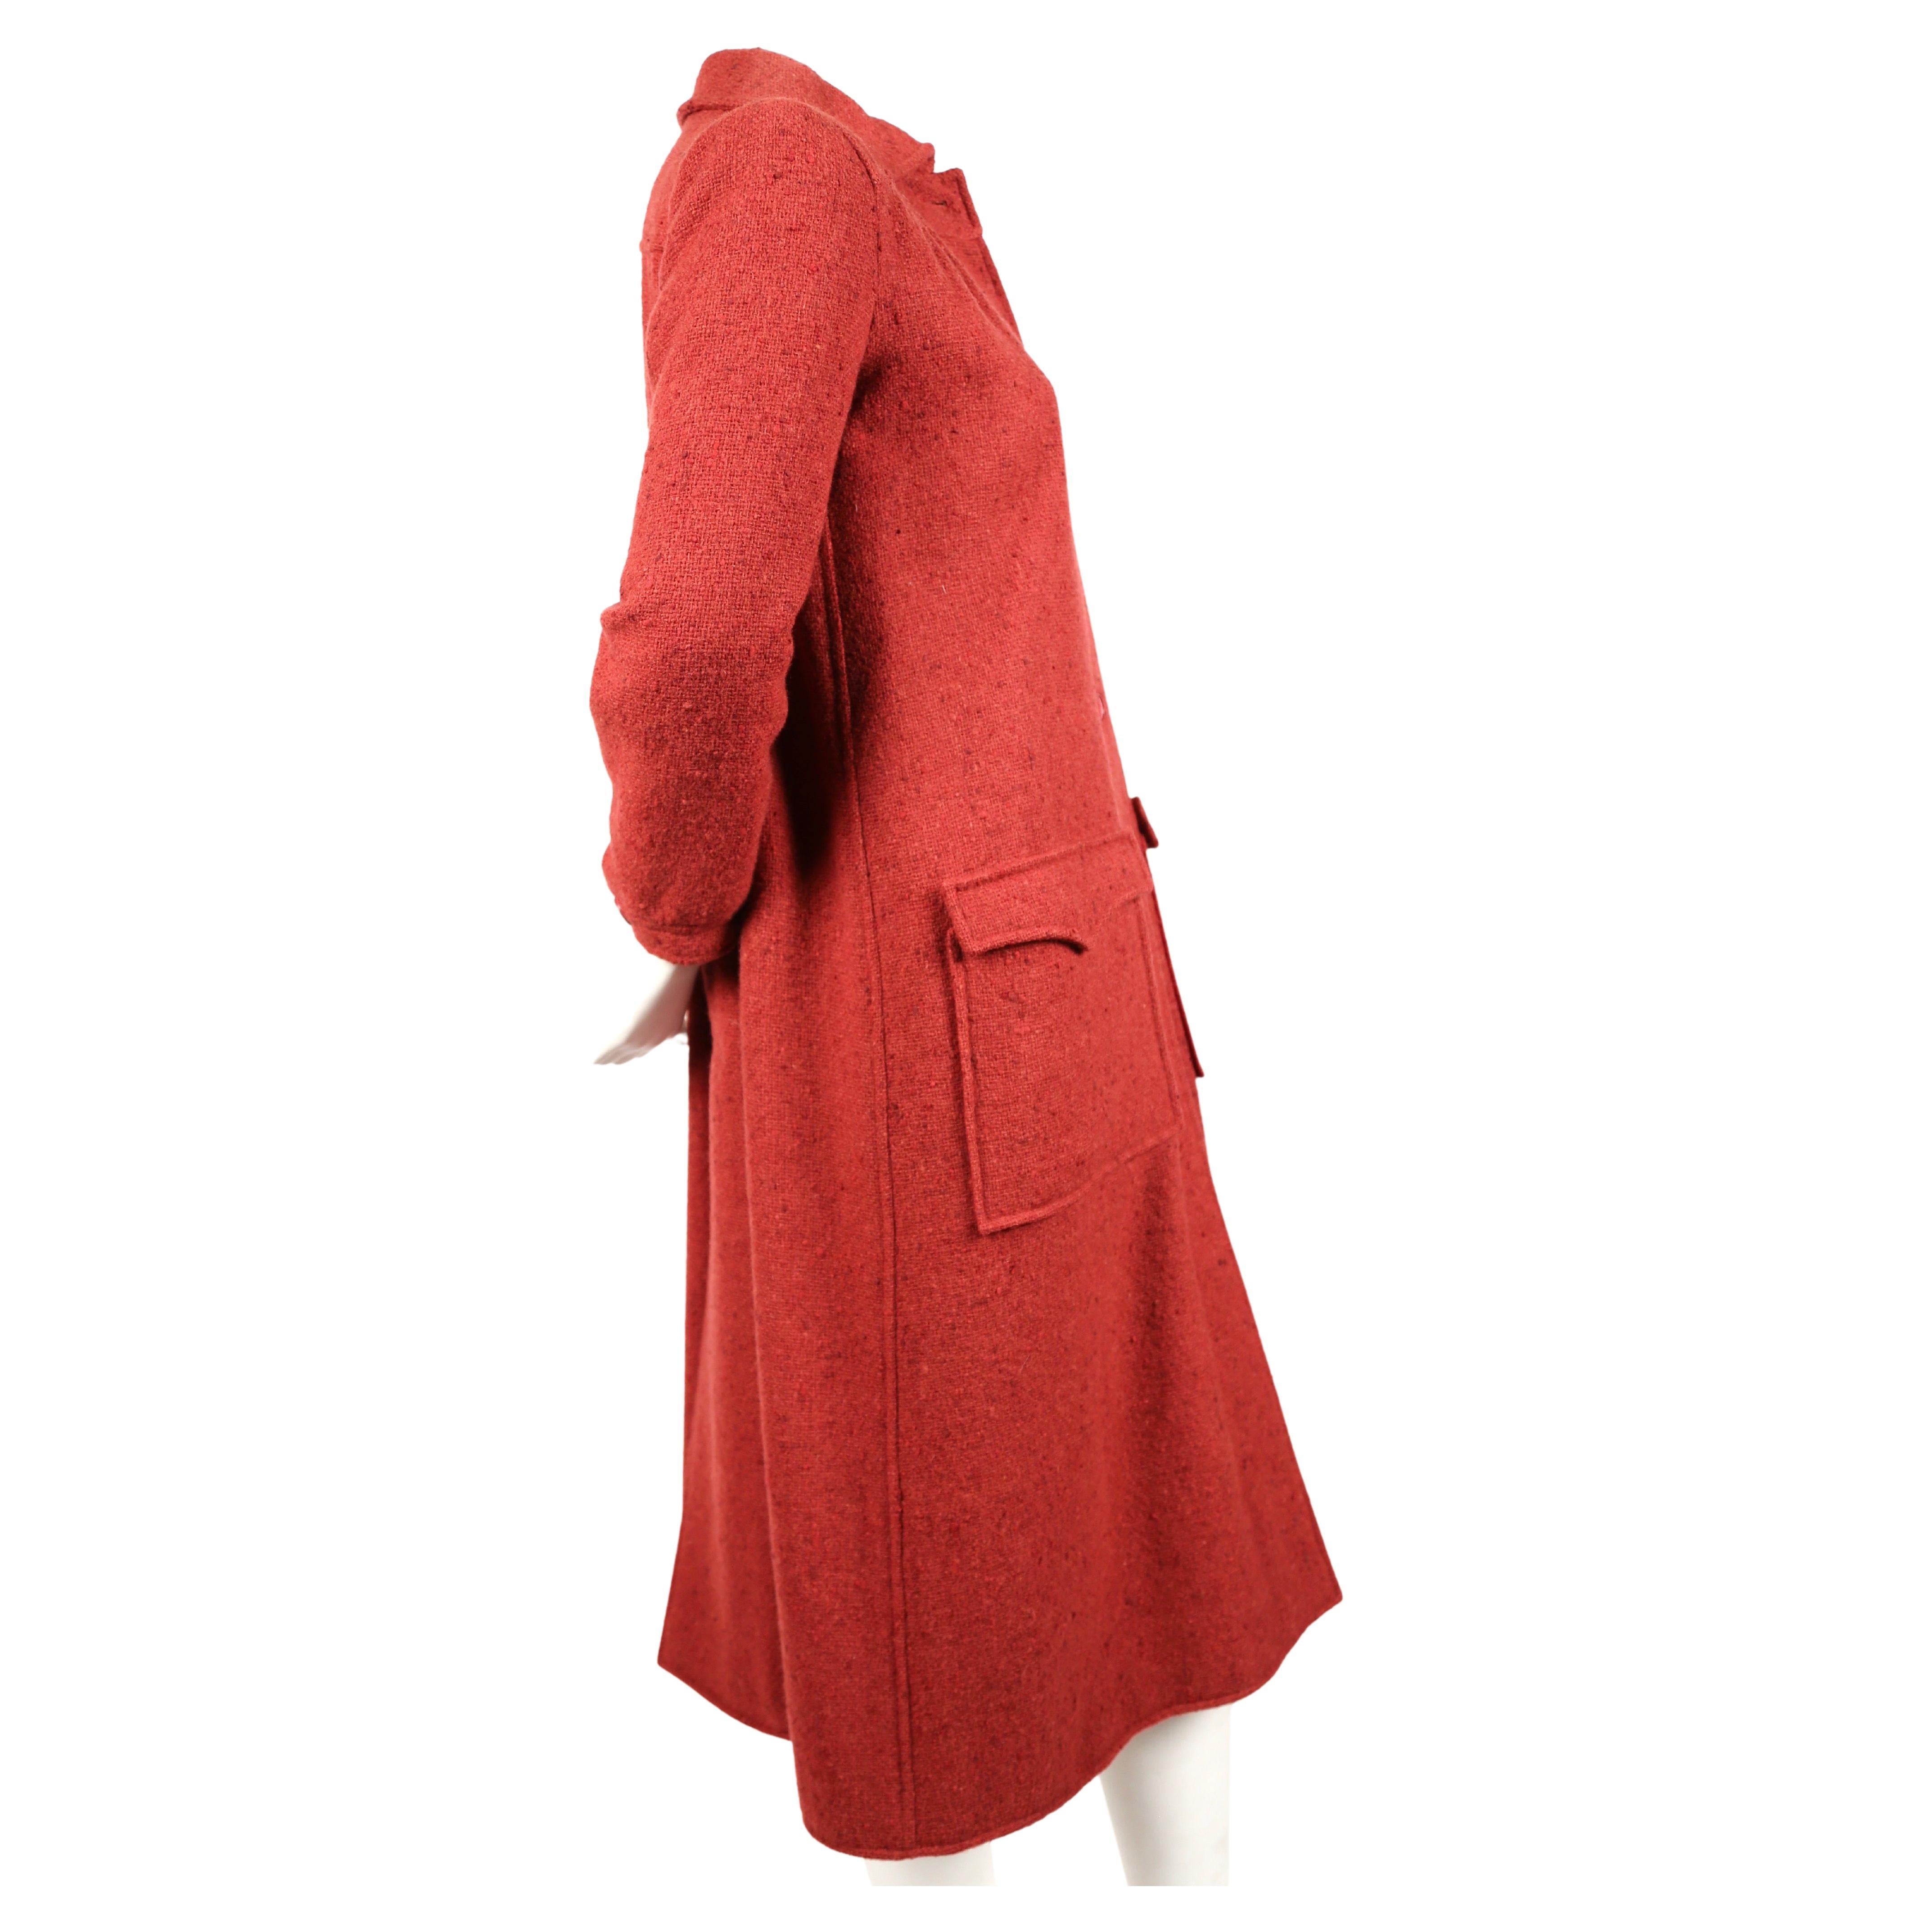 Raspberry colored nubby textured wool coat from Courreges dating to the 1970's. The coat fits narrow through the shoulders/arms and falls loose from the bust down to hemline. Labeled a size '00', which best fits a US 4 or 6. Approximate measurements